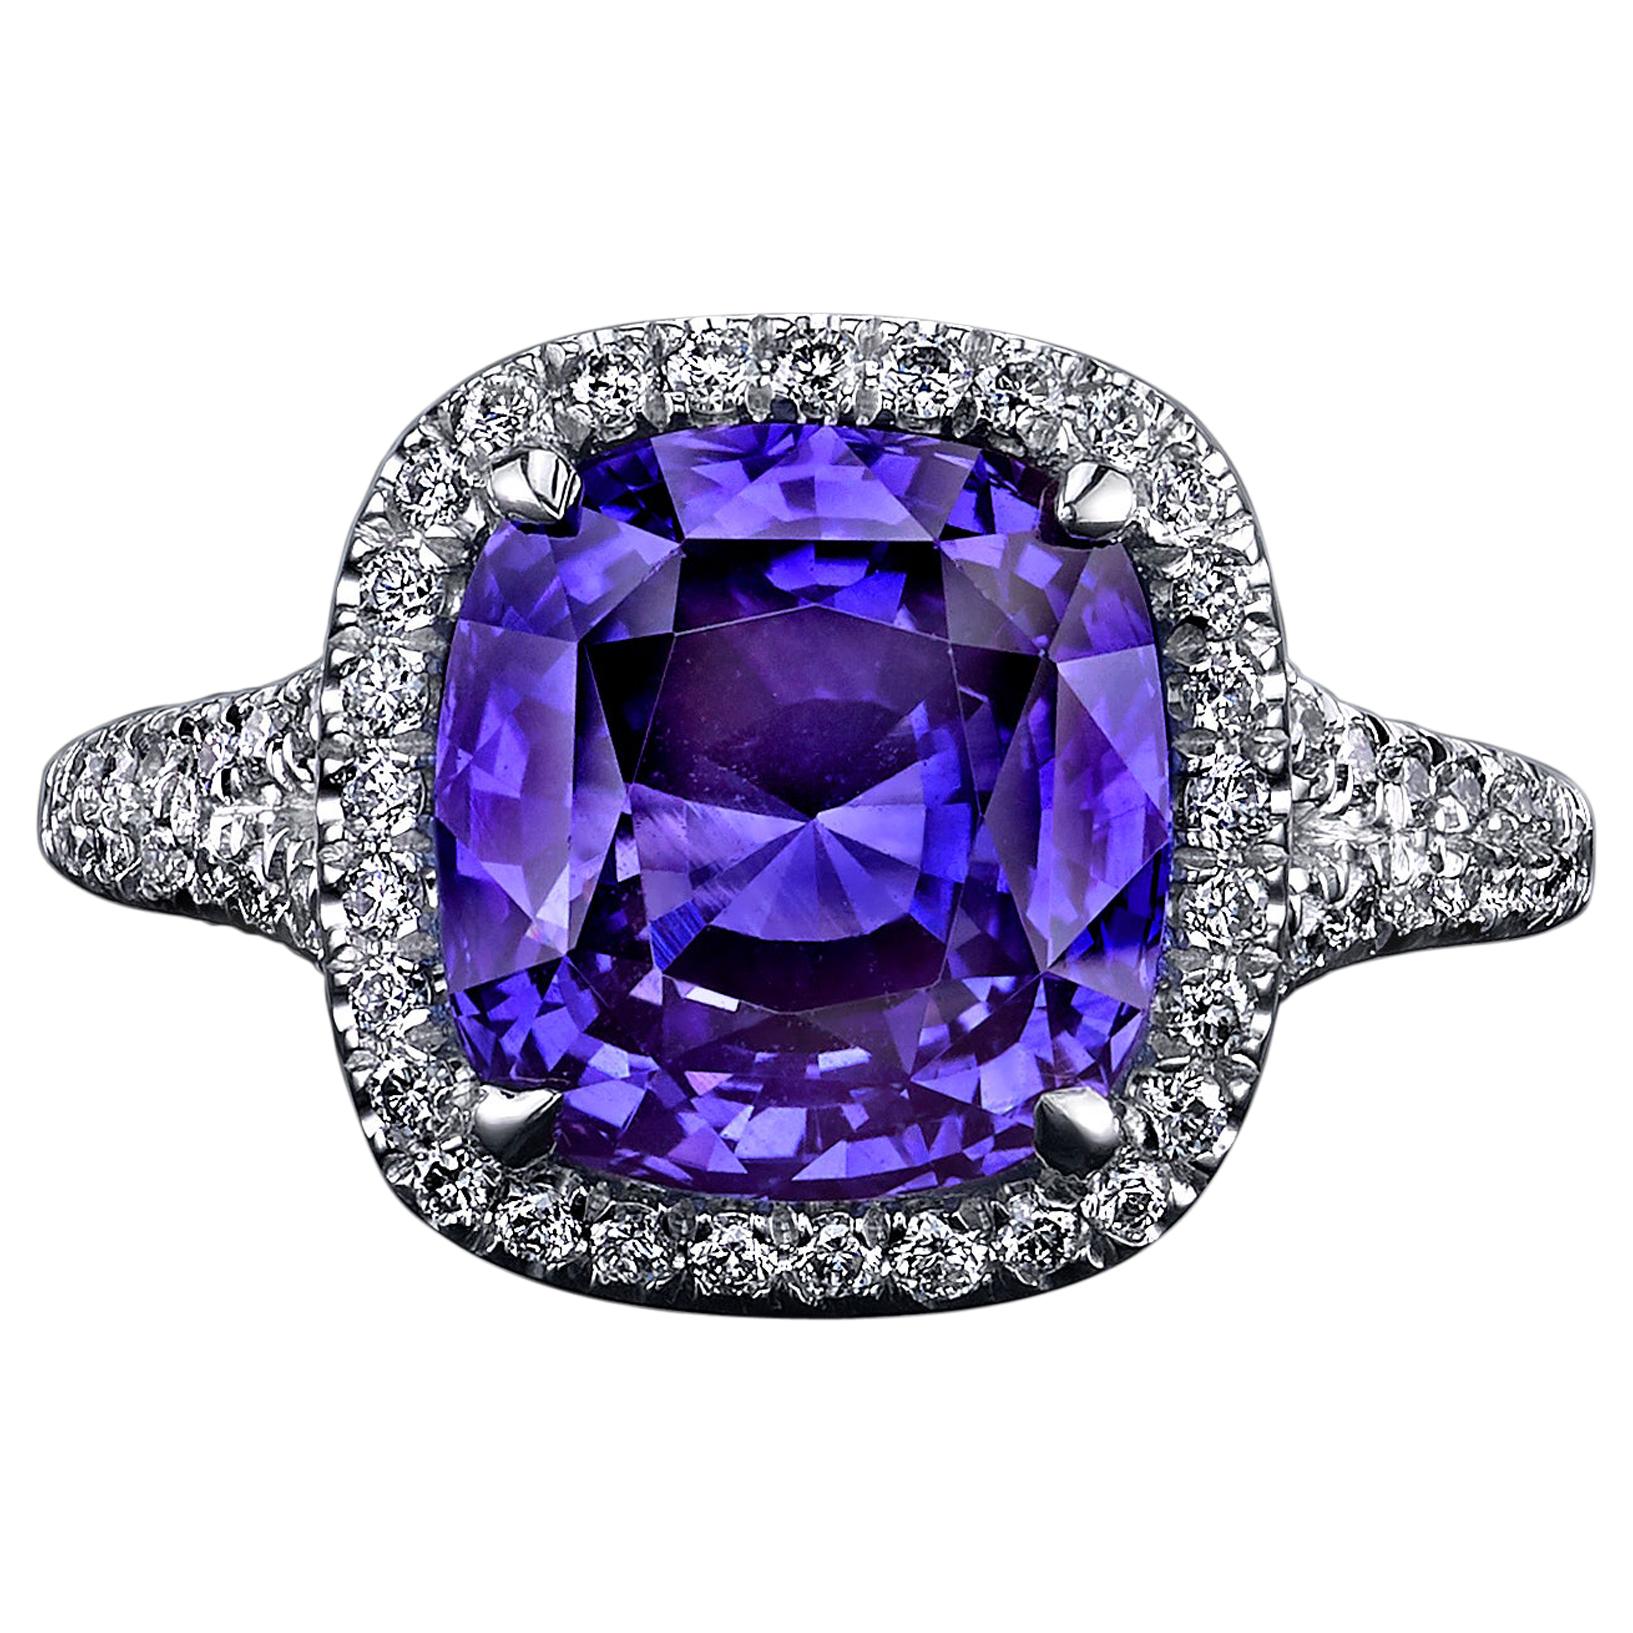 GIA Certified 6.56 Carat Cushion Violet Blue Sapphire and Diamond Ring For Sale